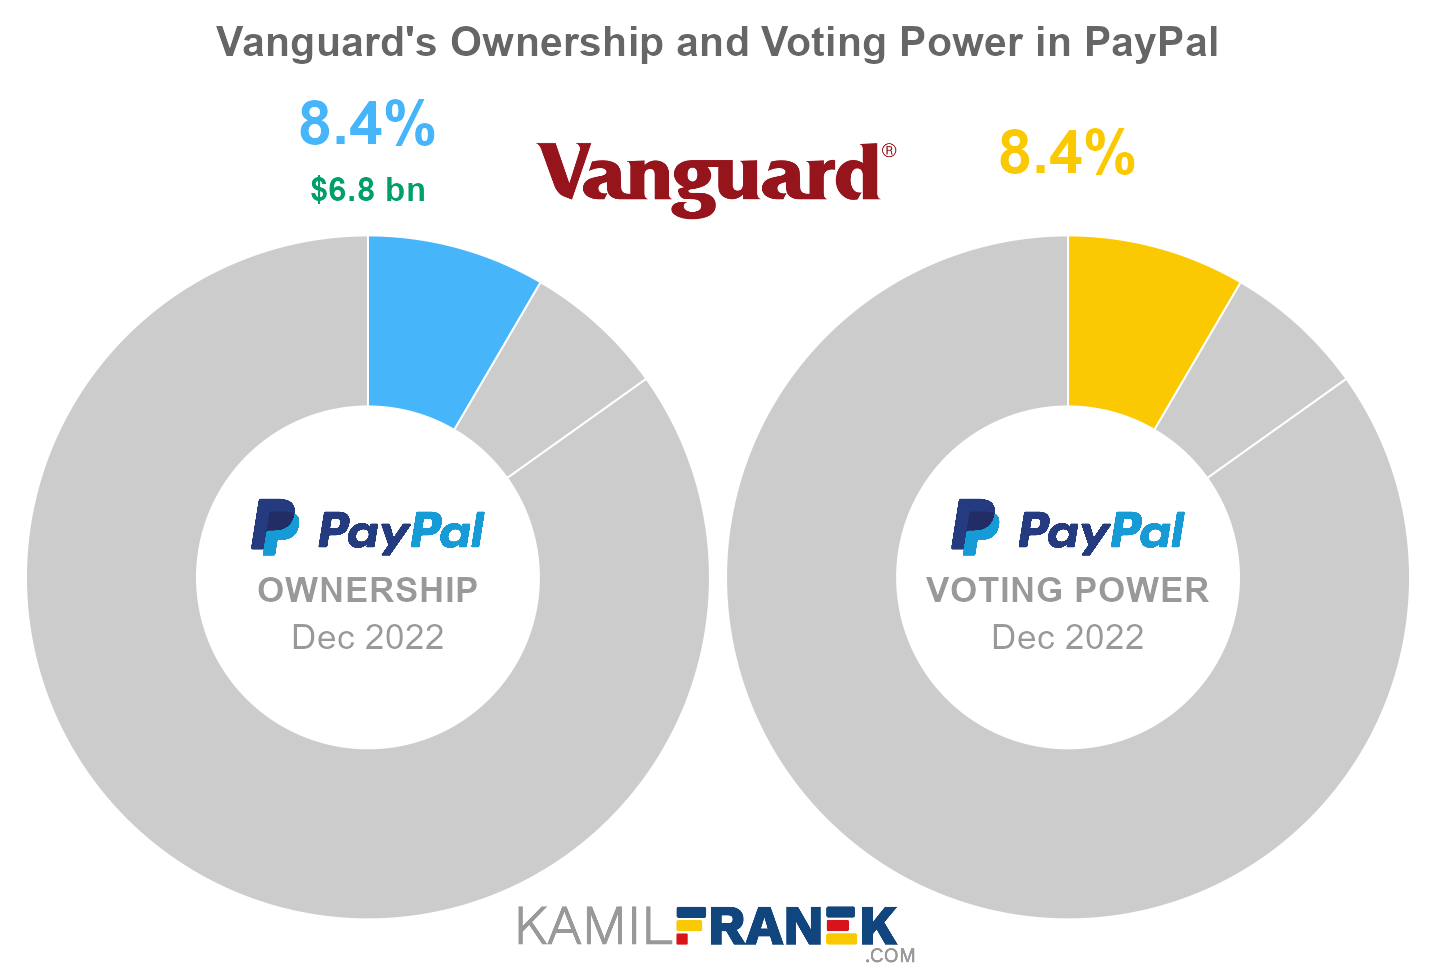 Vanguard's share ownership and voting power in PayPal (chart)